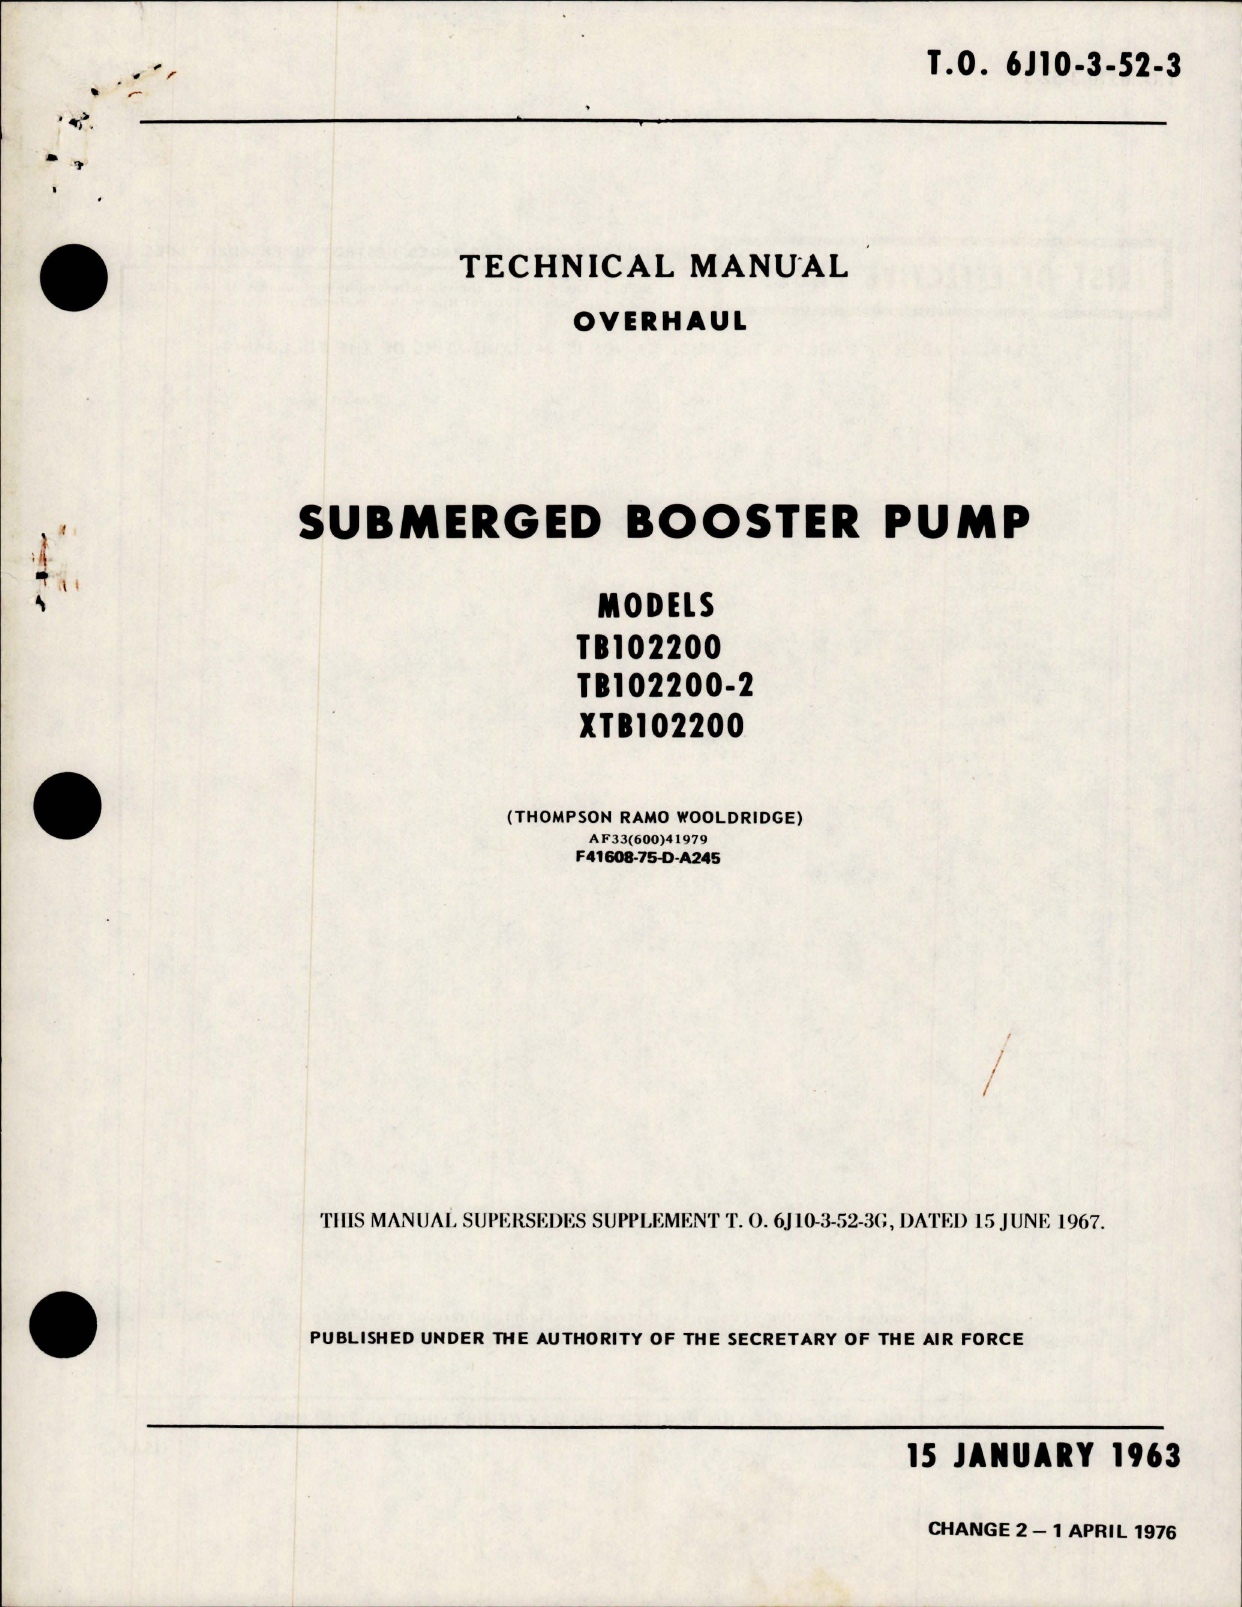 Sample page 1 from AirCorps Library document: Overhaul Manual for Submerged Booster Pumps - Models TB102200, TB102200-2, XTB102200